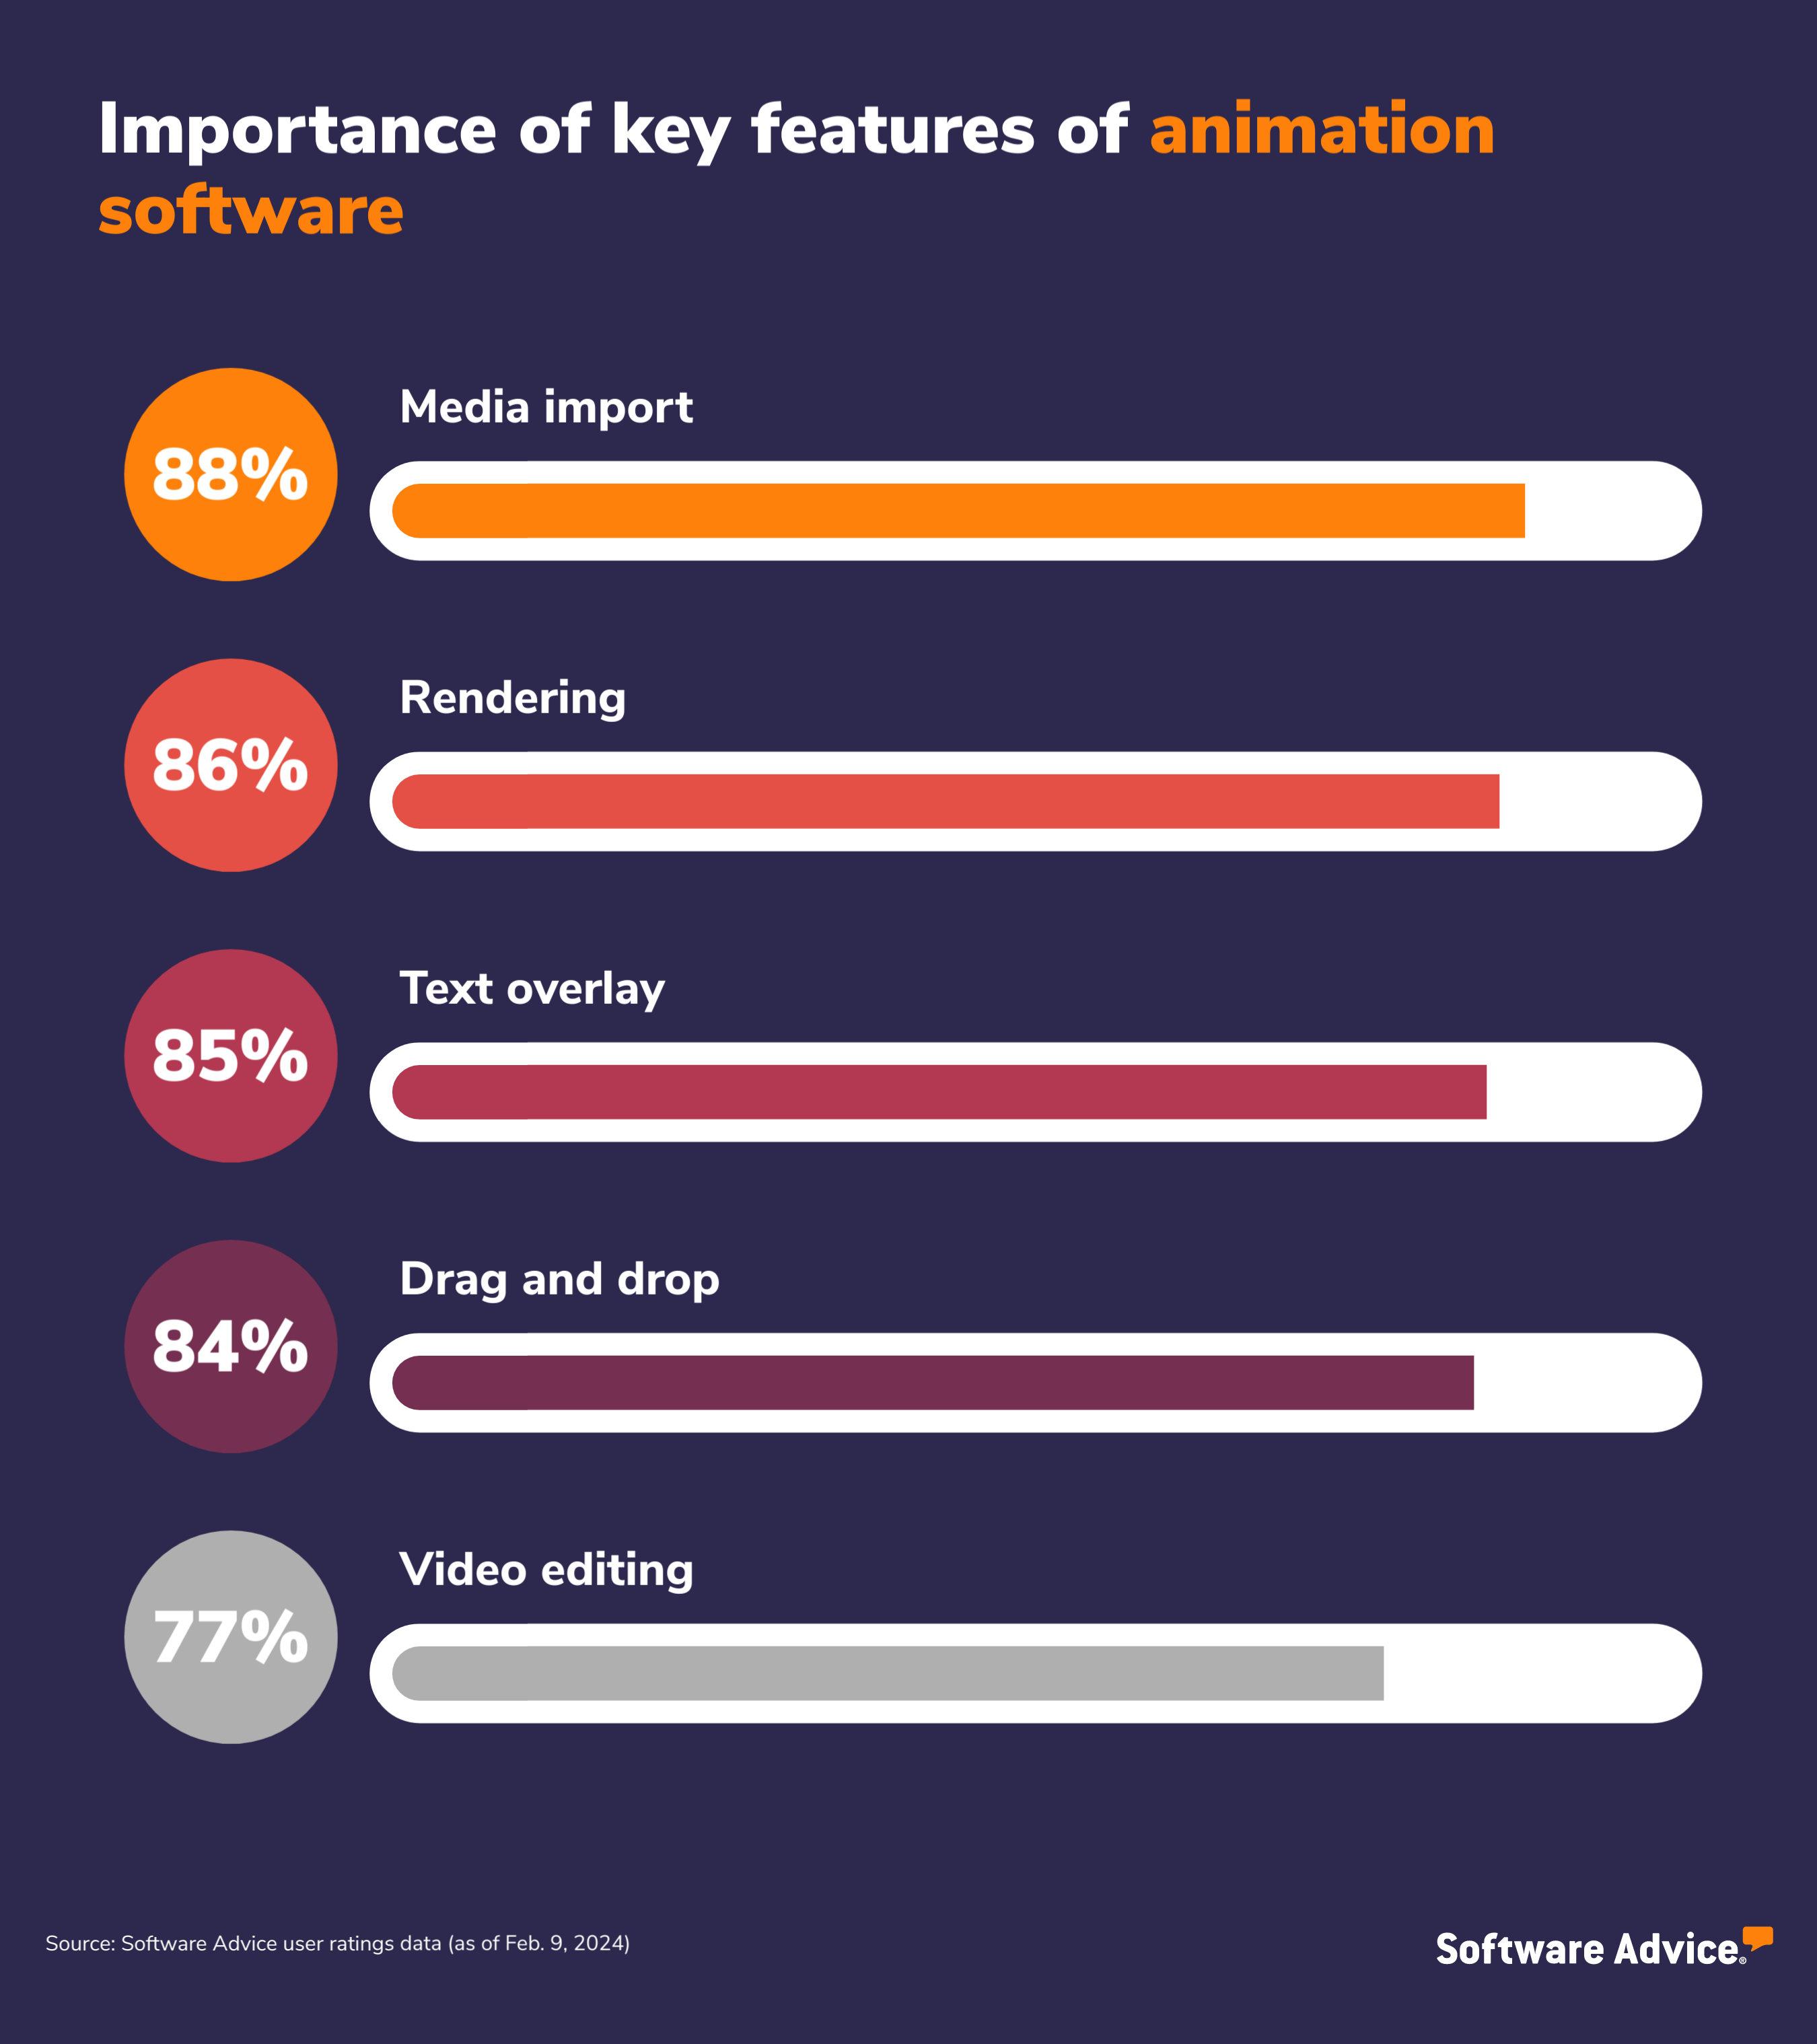 Software Advice graphic: Importance of key features of animation software: 88% media import; 86% rendering; 85% text overlay; 84% drag and drop; 77% video editing